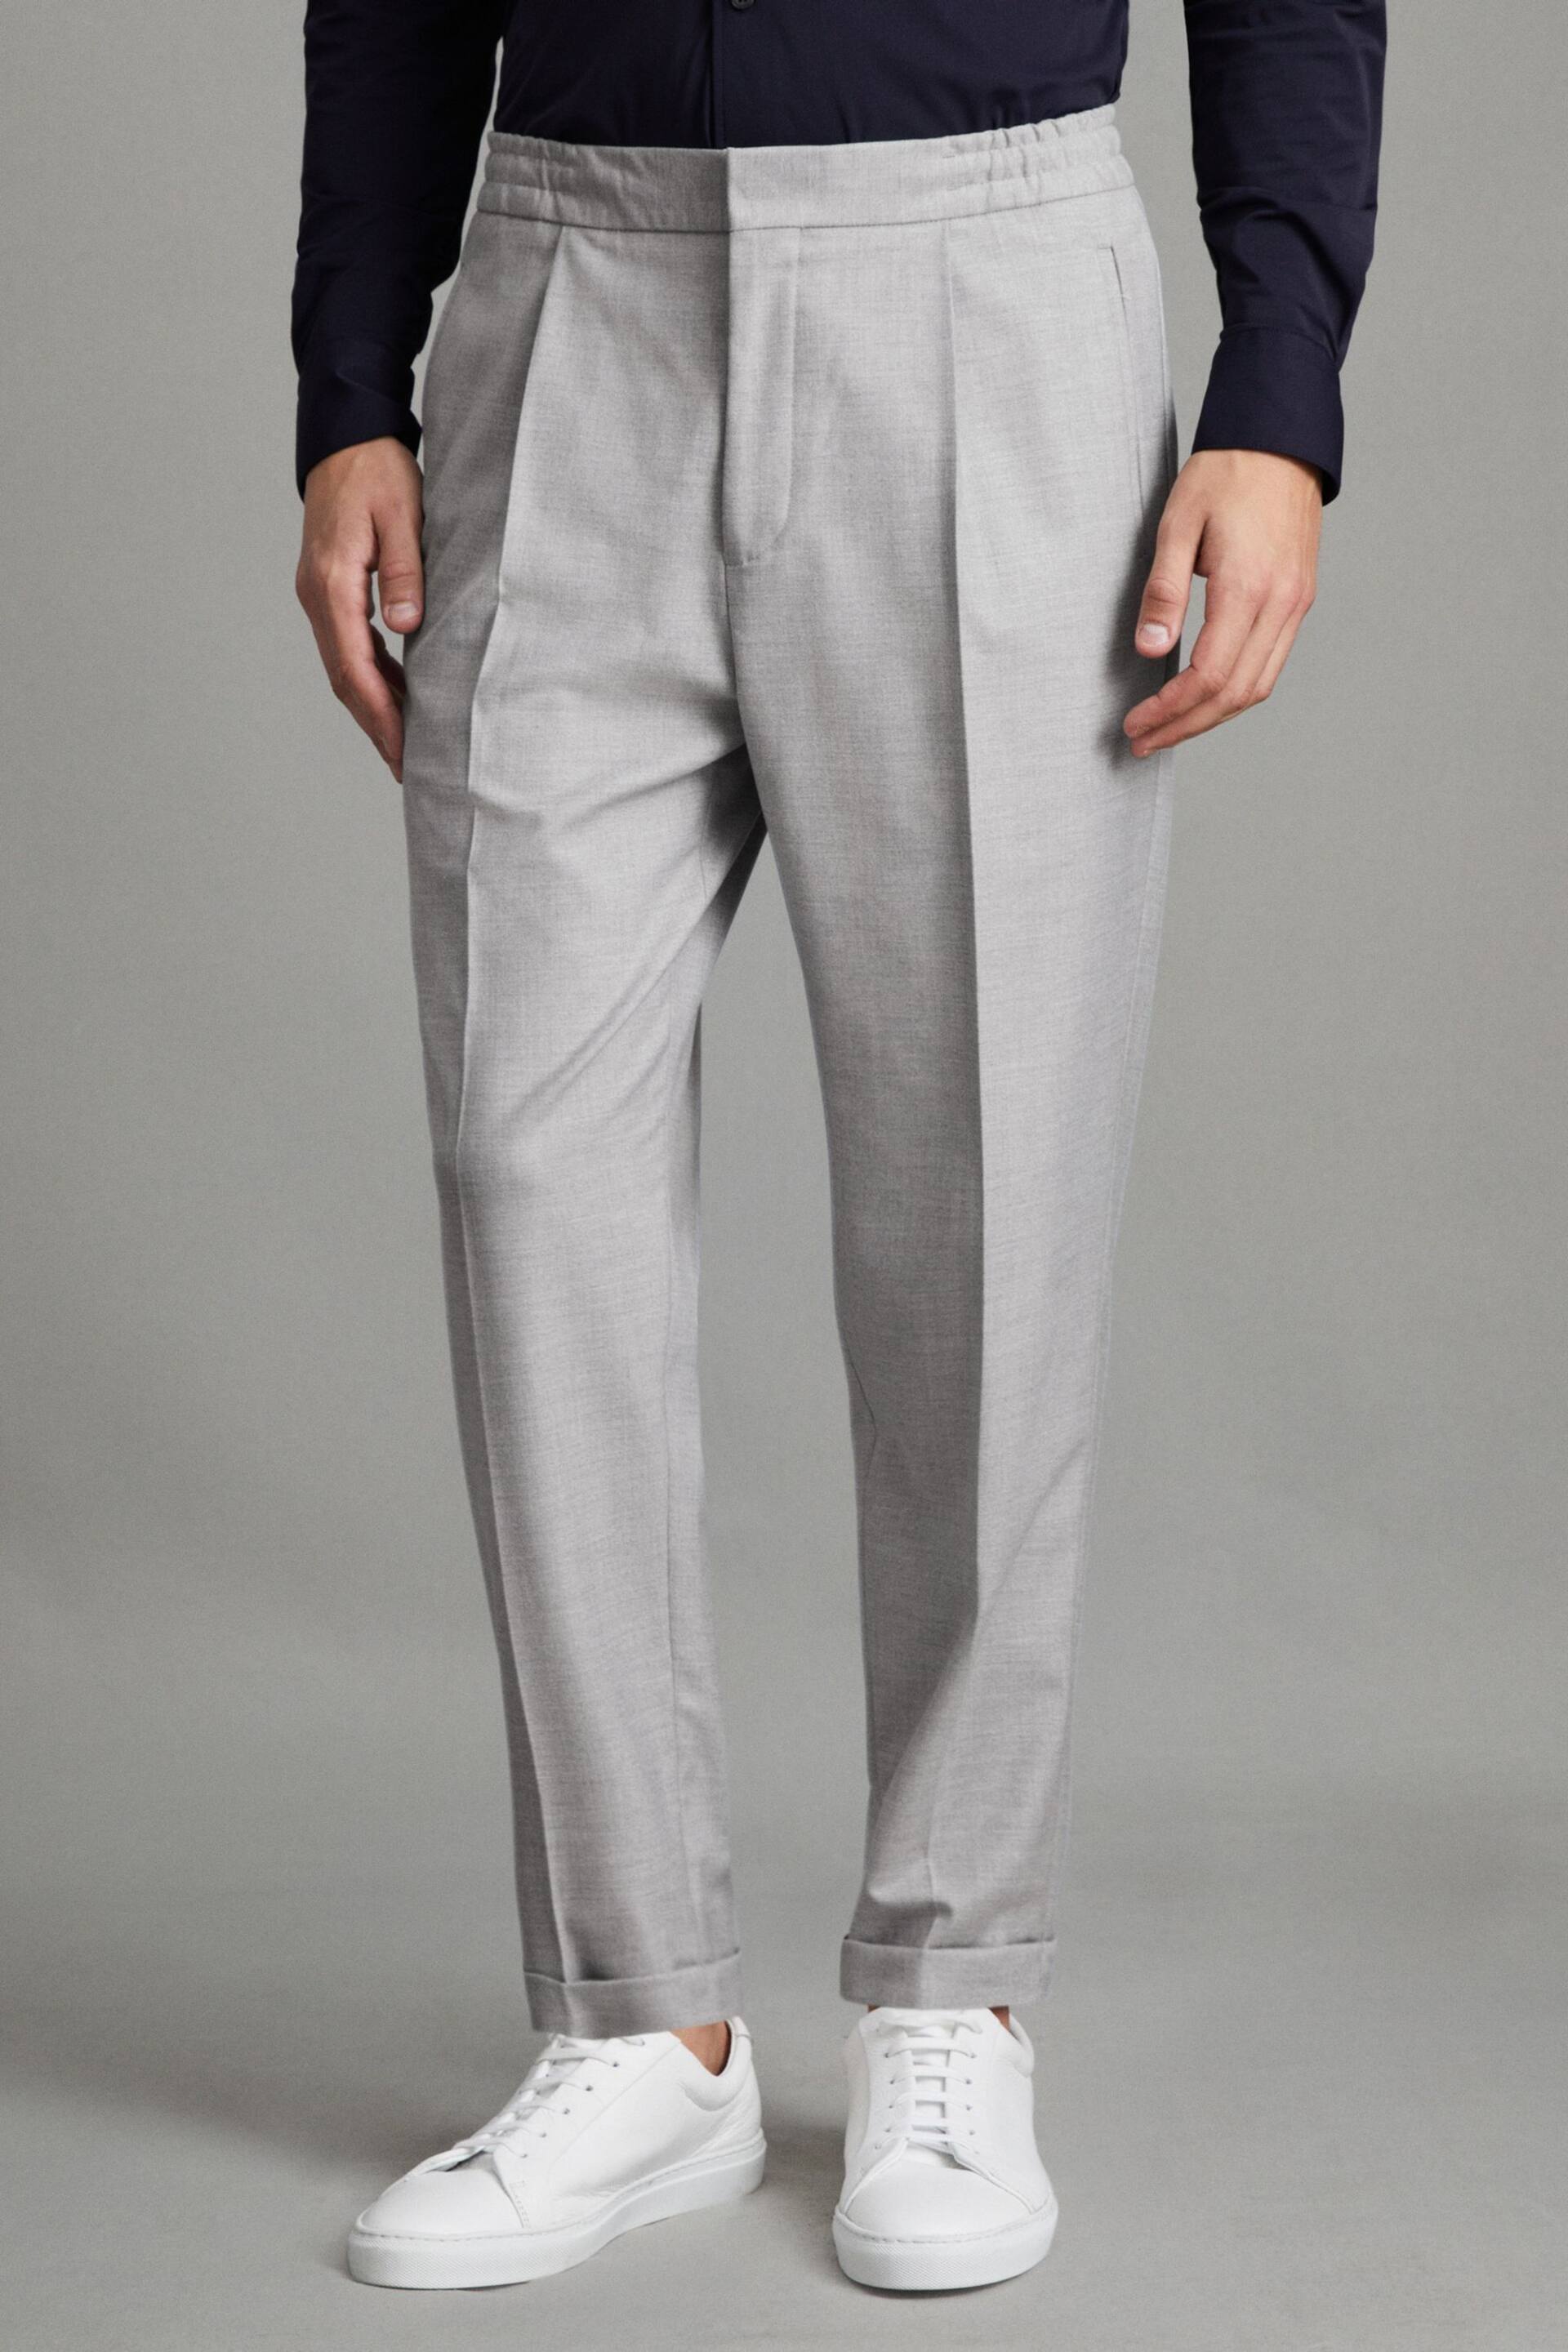 Reiss Grey Brighton Relaxed Drawstring Trousers with Turn-Ups - Image 1 of 6